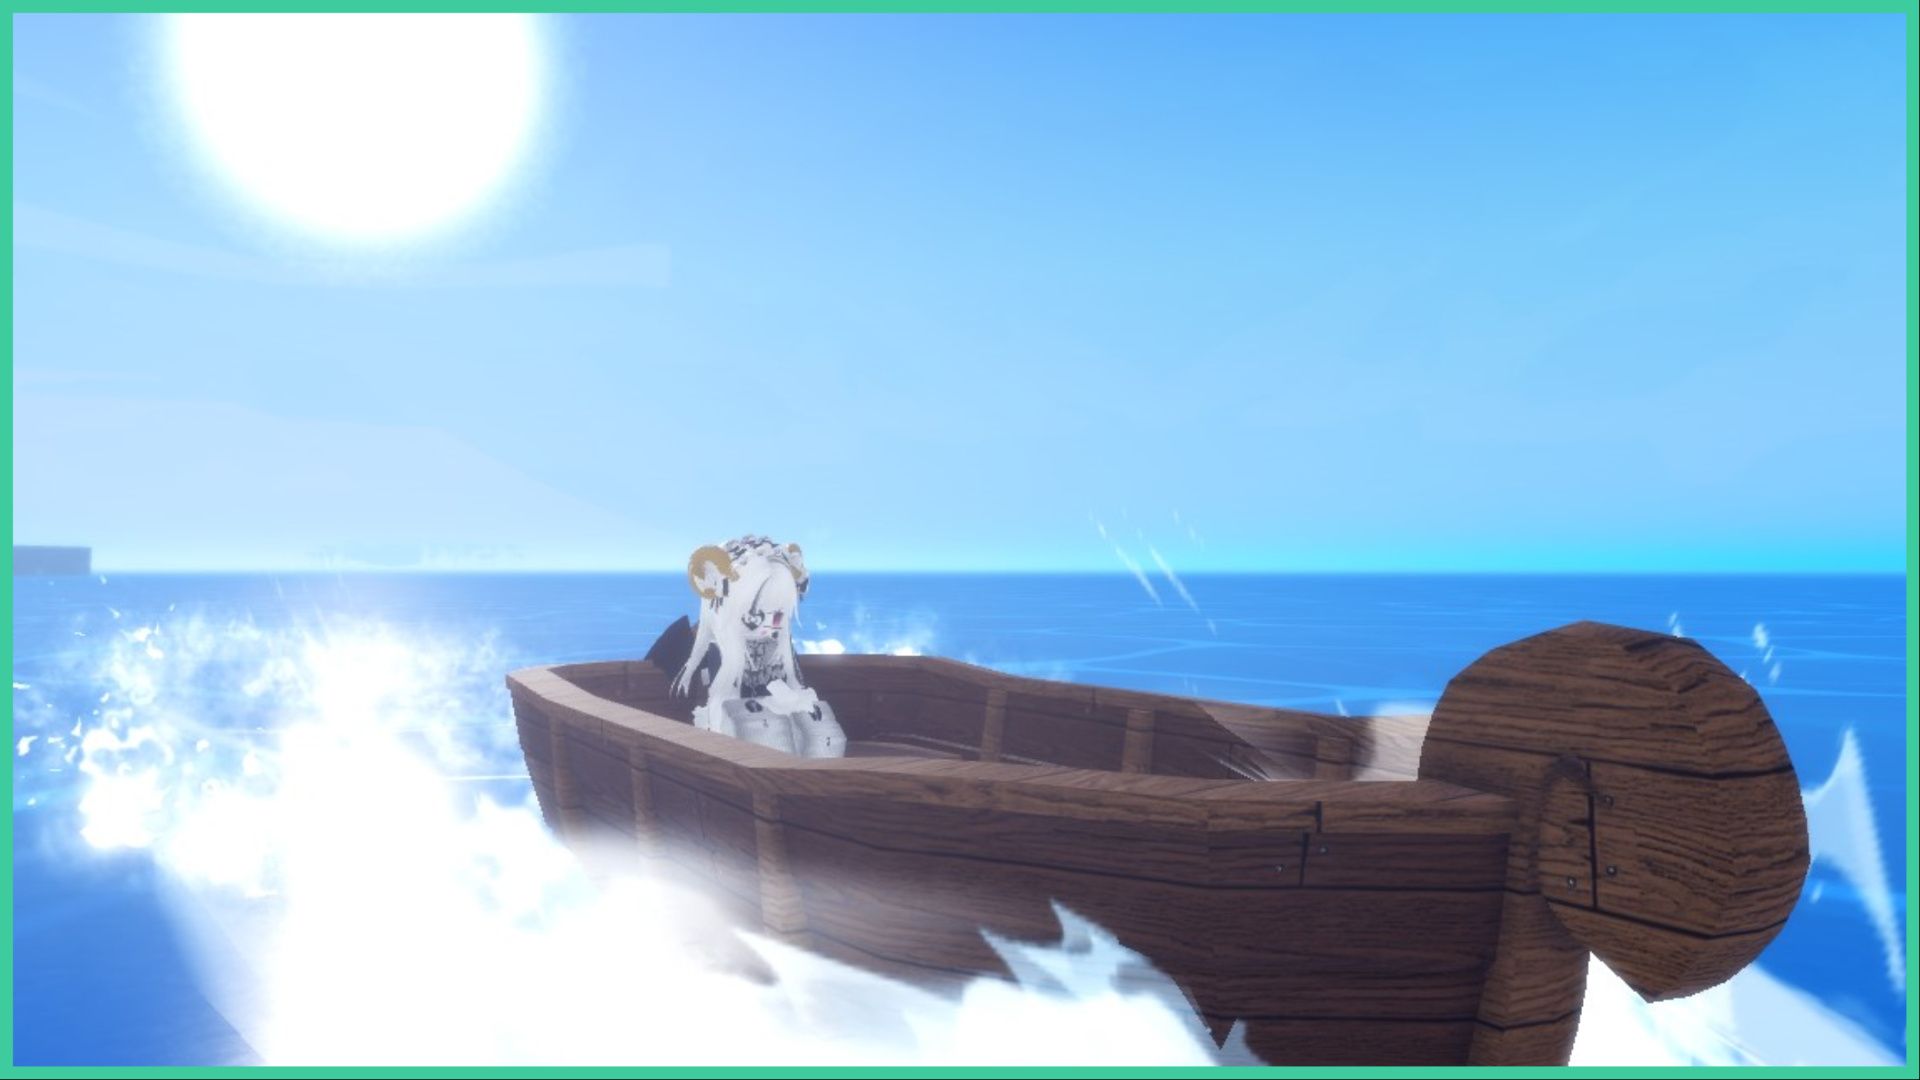 feature image for our demon piece soru guide, the roblox player is sitting inside of a wooden boat as it moves across the ocean with the water splashing up the side of the boat as the sun glows in the pale sky